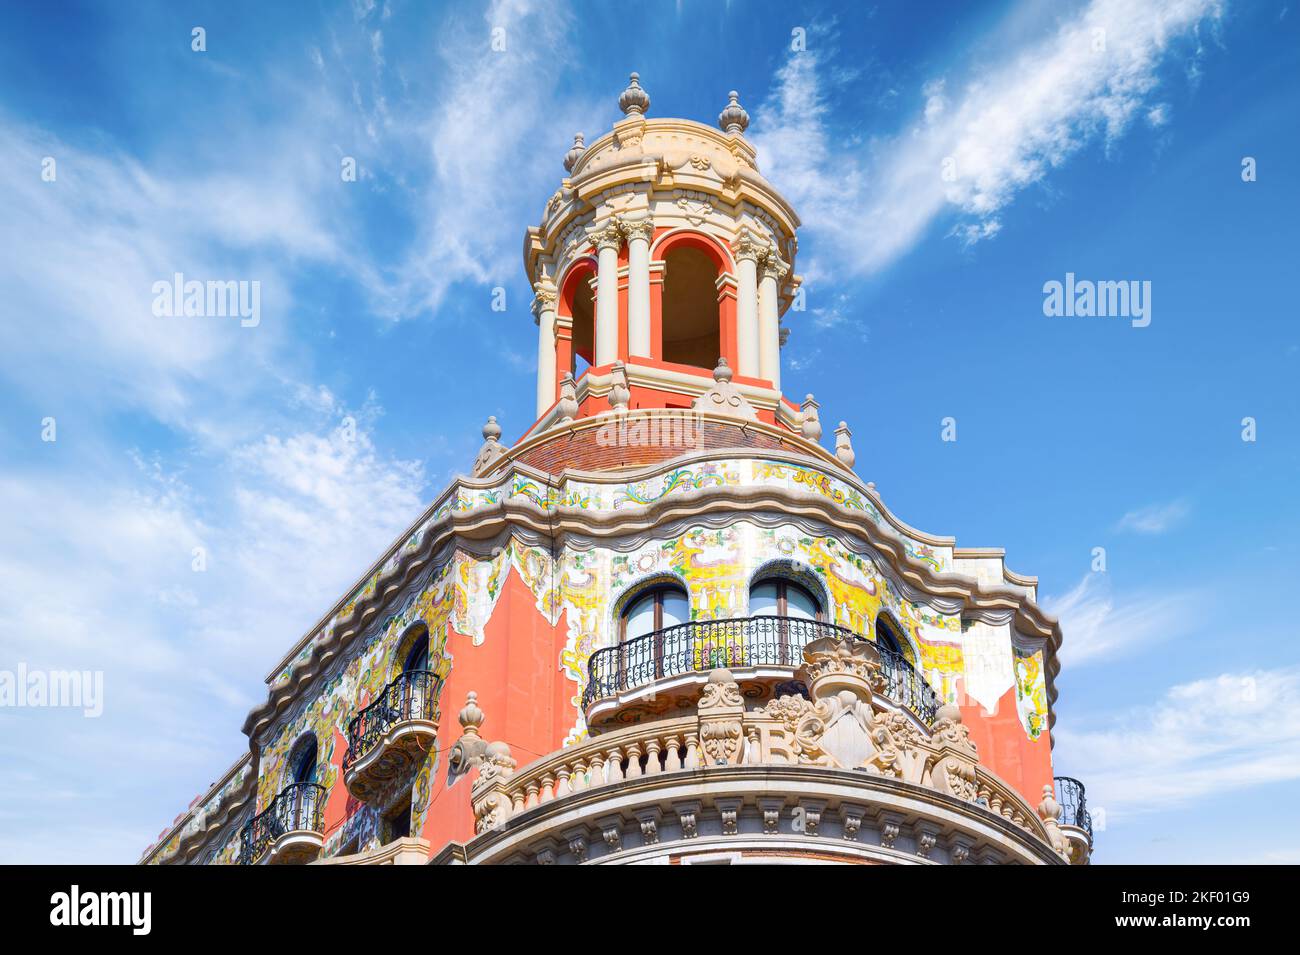 Valencia, Spain - November 5, 2022: Exterior architecture of the Bank of Valencia colonial building. The landmark is a tourist attraction. Stock Photo